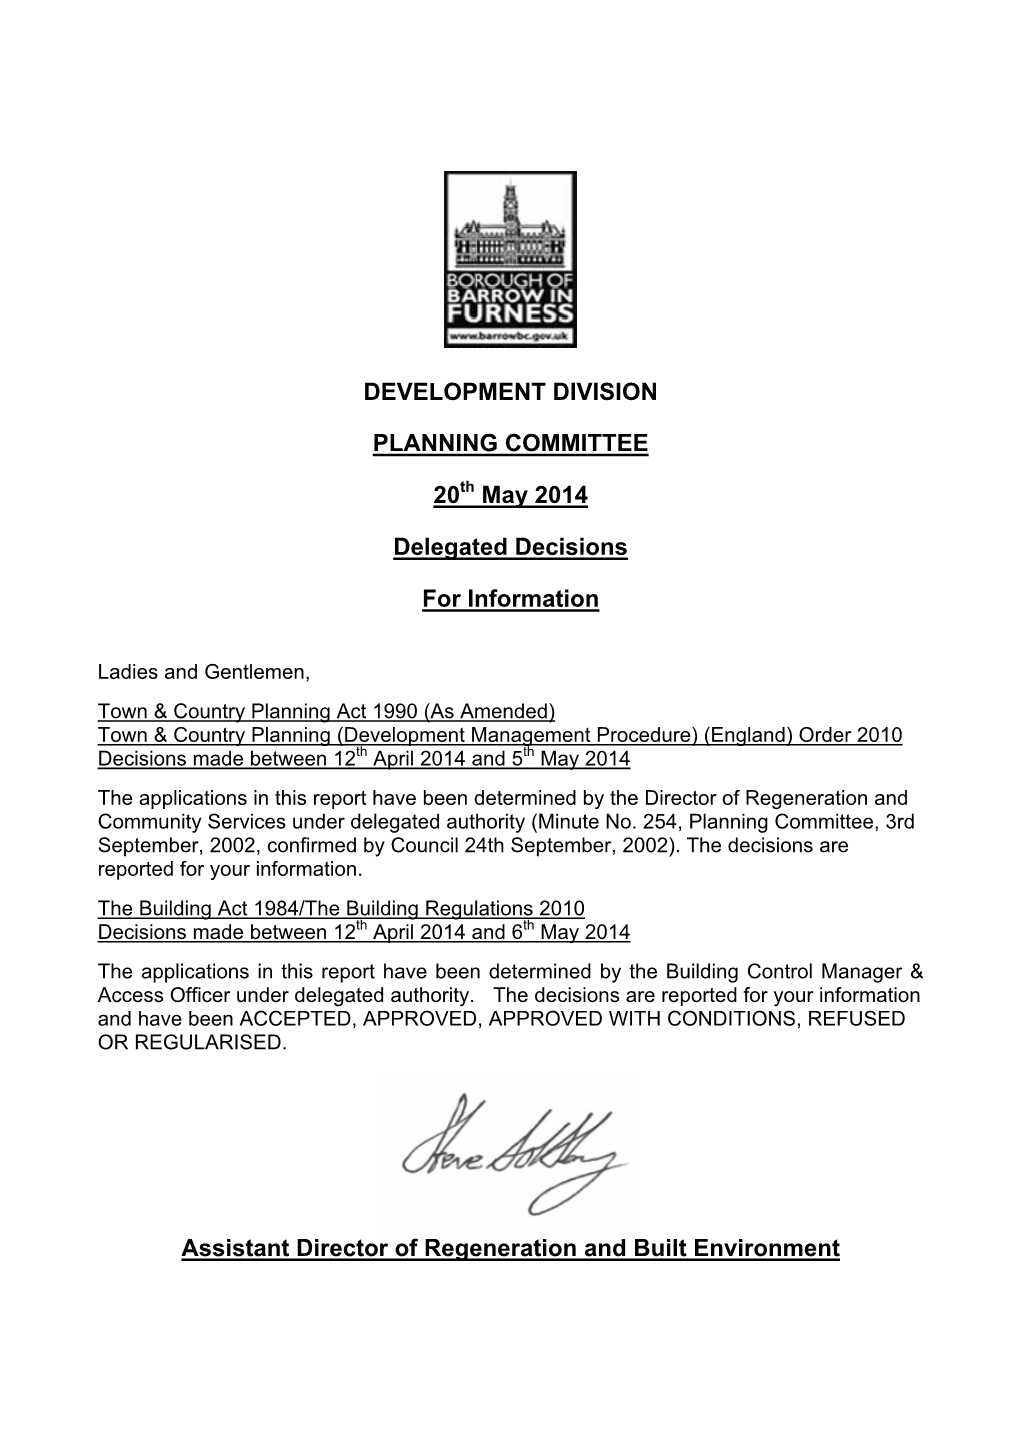 DEVELOPMENT DIVISION PLANNING COMMITTEE 20 May 2014 Delegated Decisions for Information Assistant Director of Regeneration and B